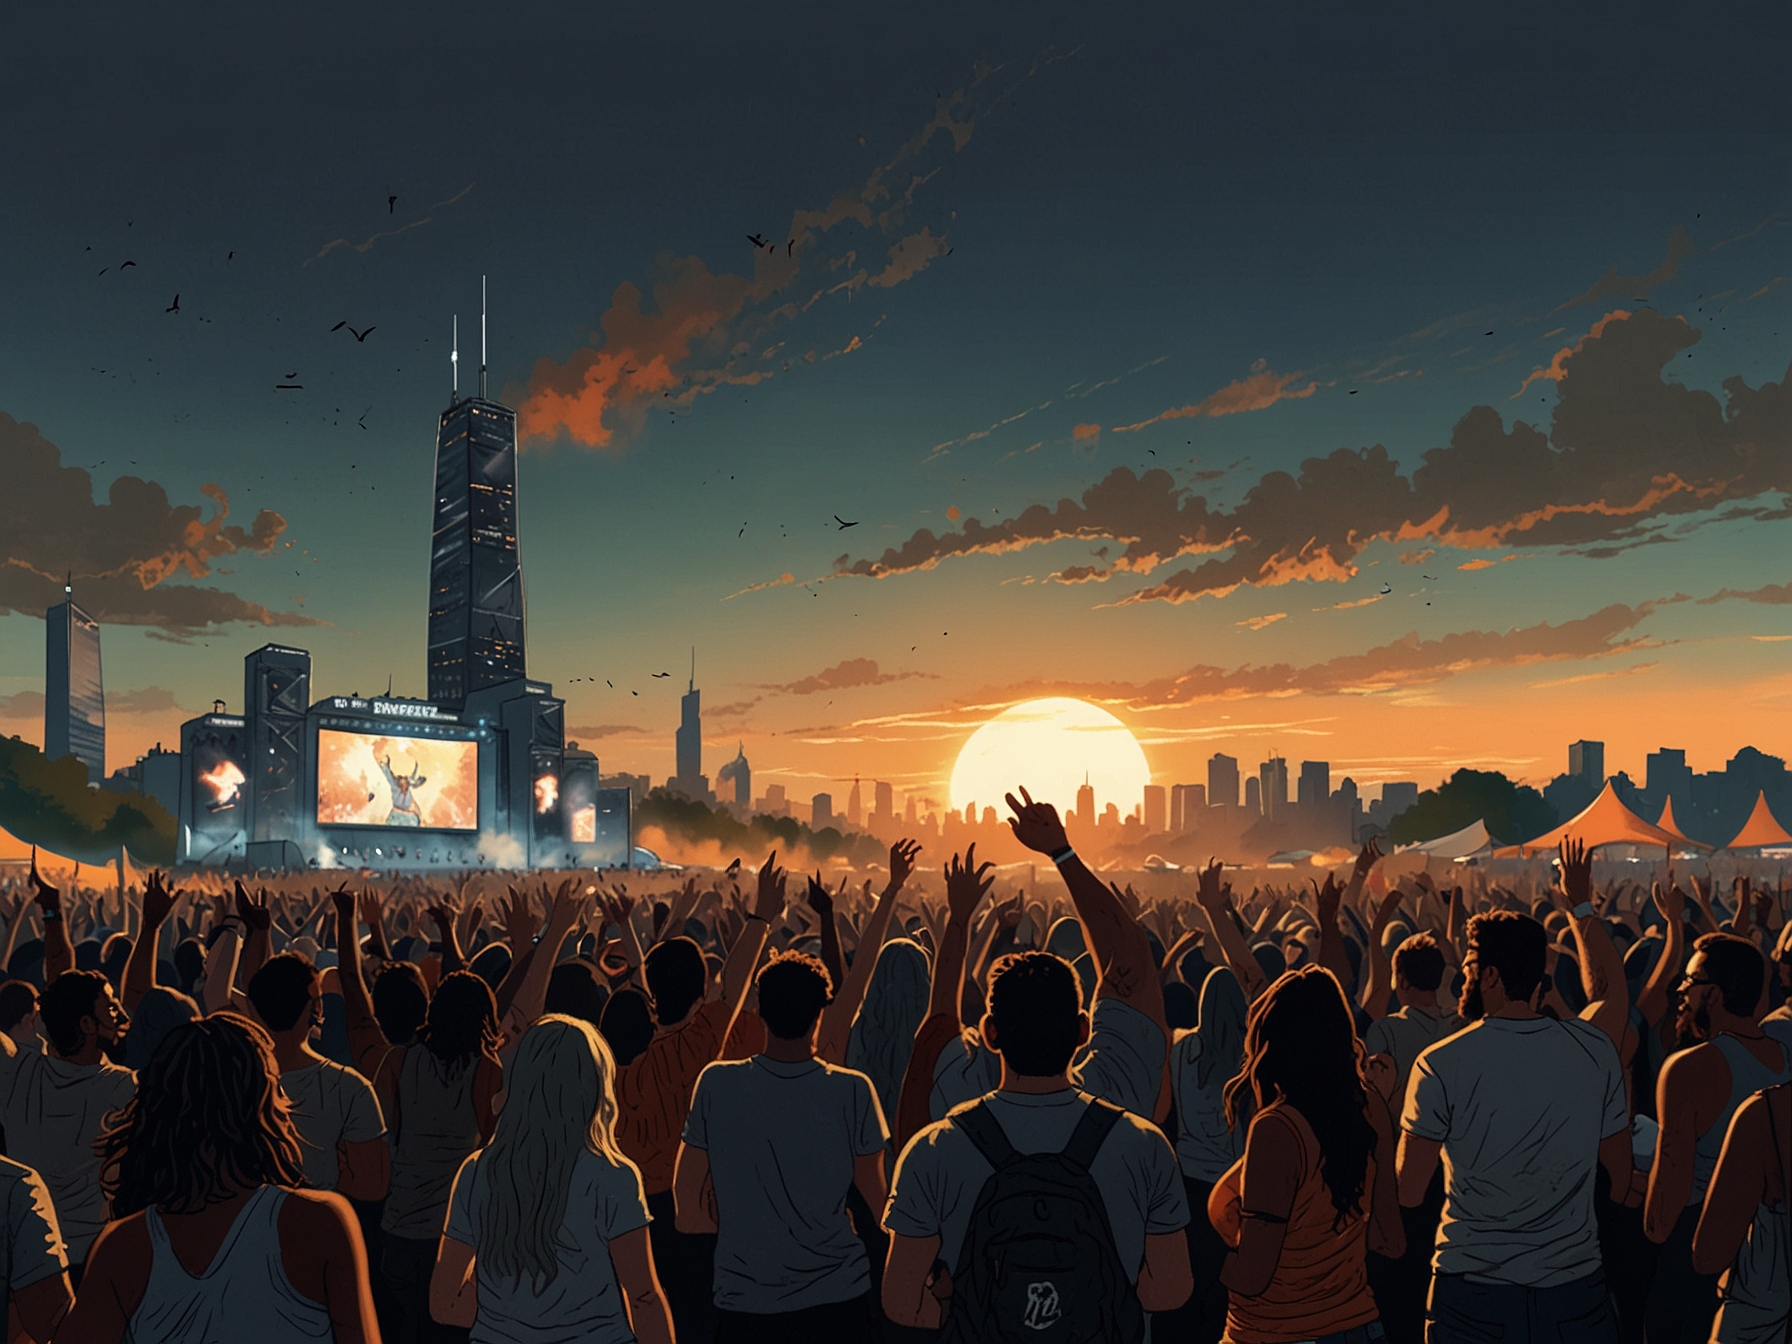 Crowd of enthusiastic festival-goers at Lollapalooza, eagerly awaiting Megan Thee Stallion's headlining performance, capturing the excitement and vibe of the music festival.